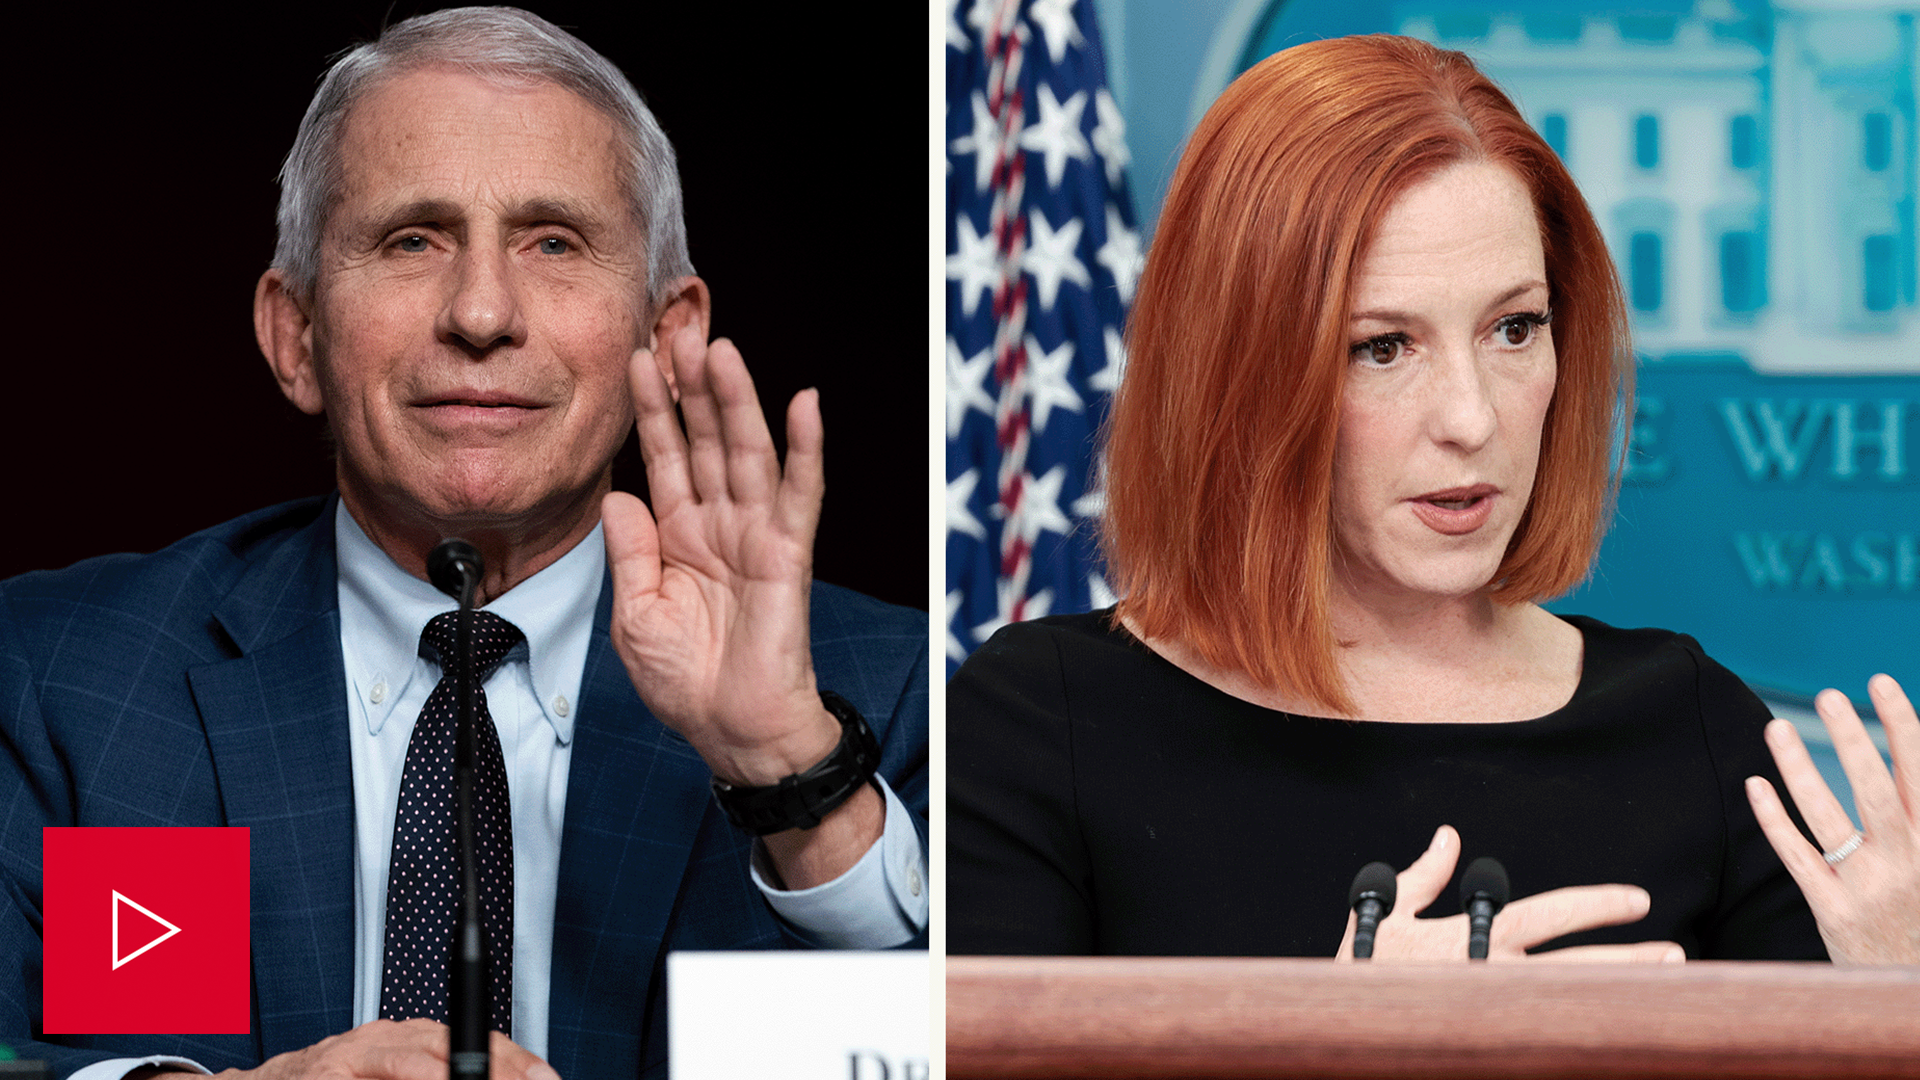 A side-by-side showing Anthony Fauci and White House press secretary Jen Psaki.